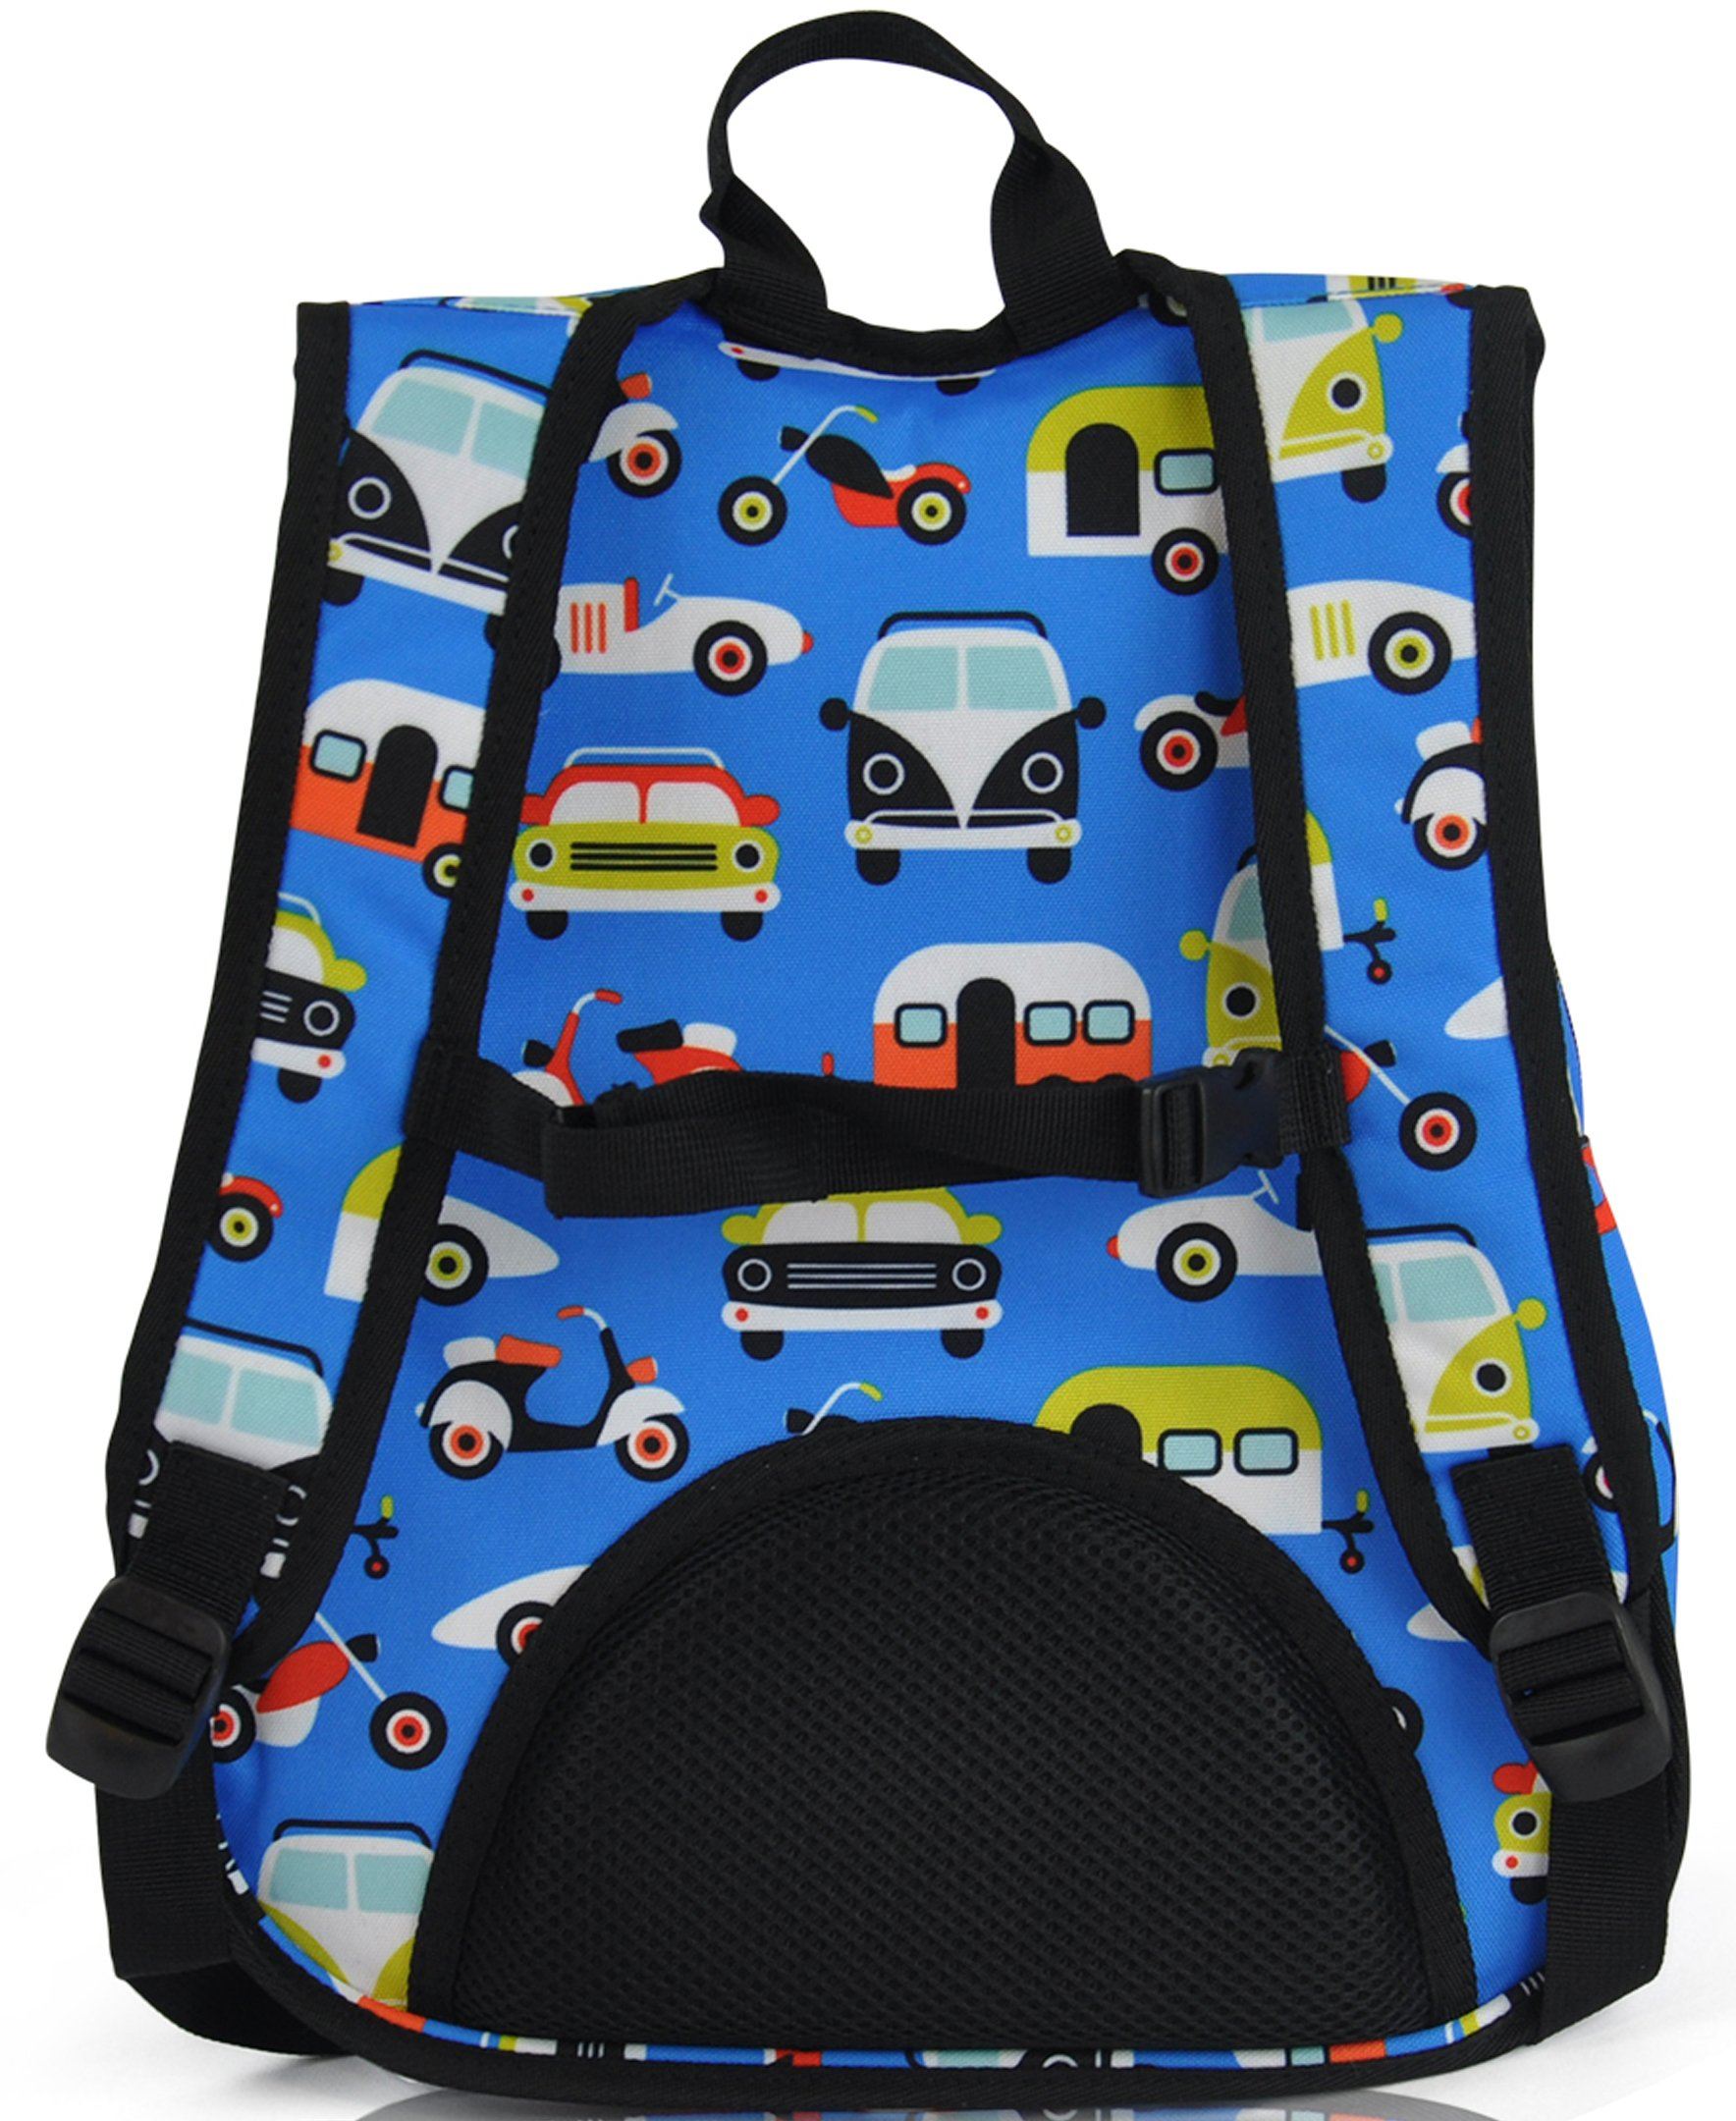 O3KCBP019 Obersee Mini Preschool All-in-One Backpack for Toddlers and Kids with integrated Insulated Cooler | Transportation - image 3 of 4